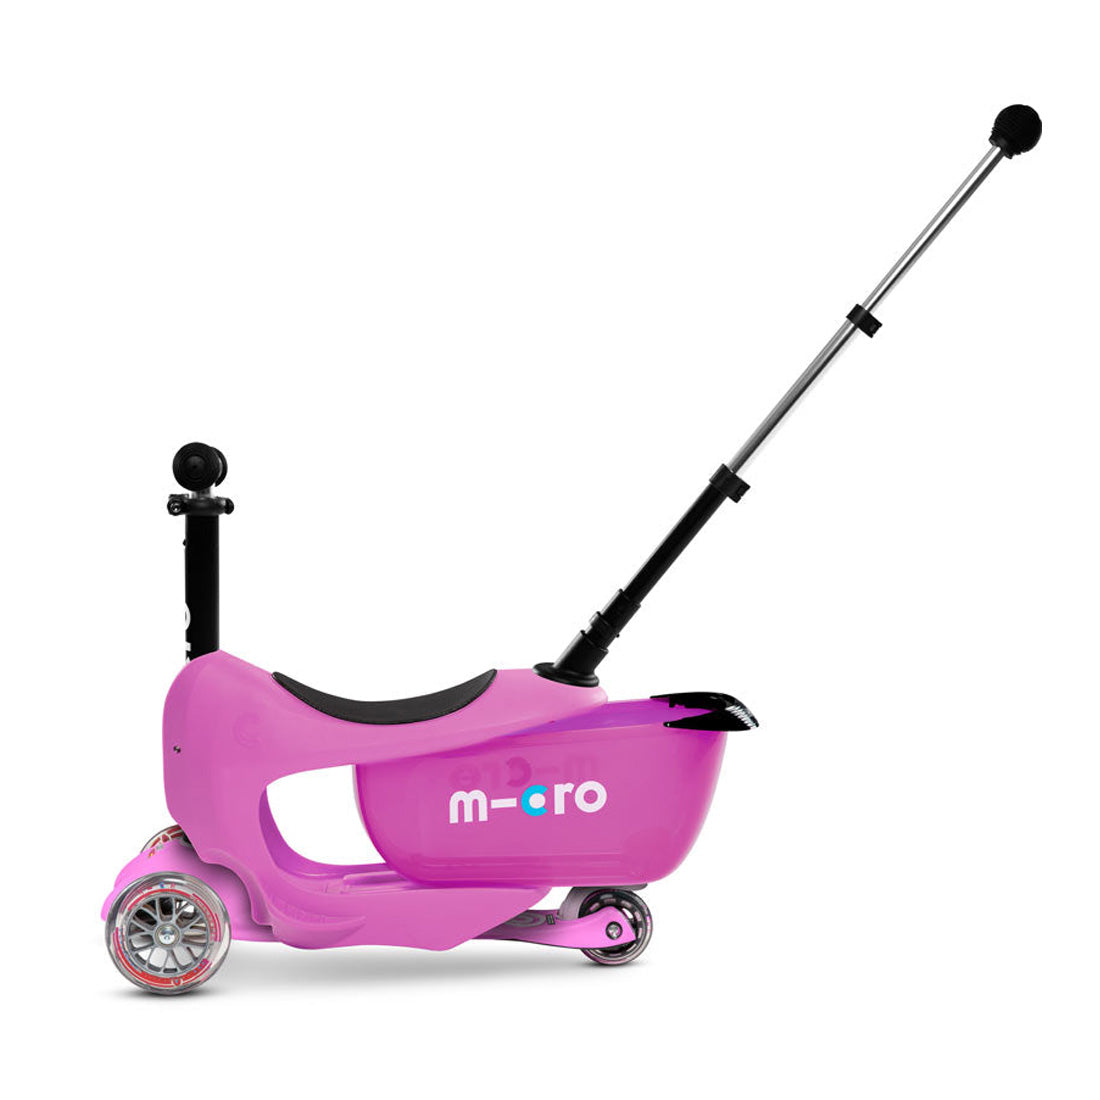 Micro Mini 2Go Deluxe Plus - Pink Scooter Completes Rec